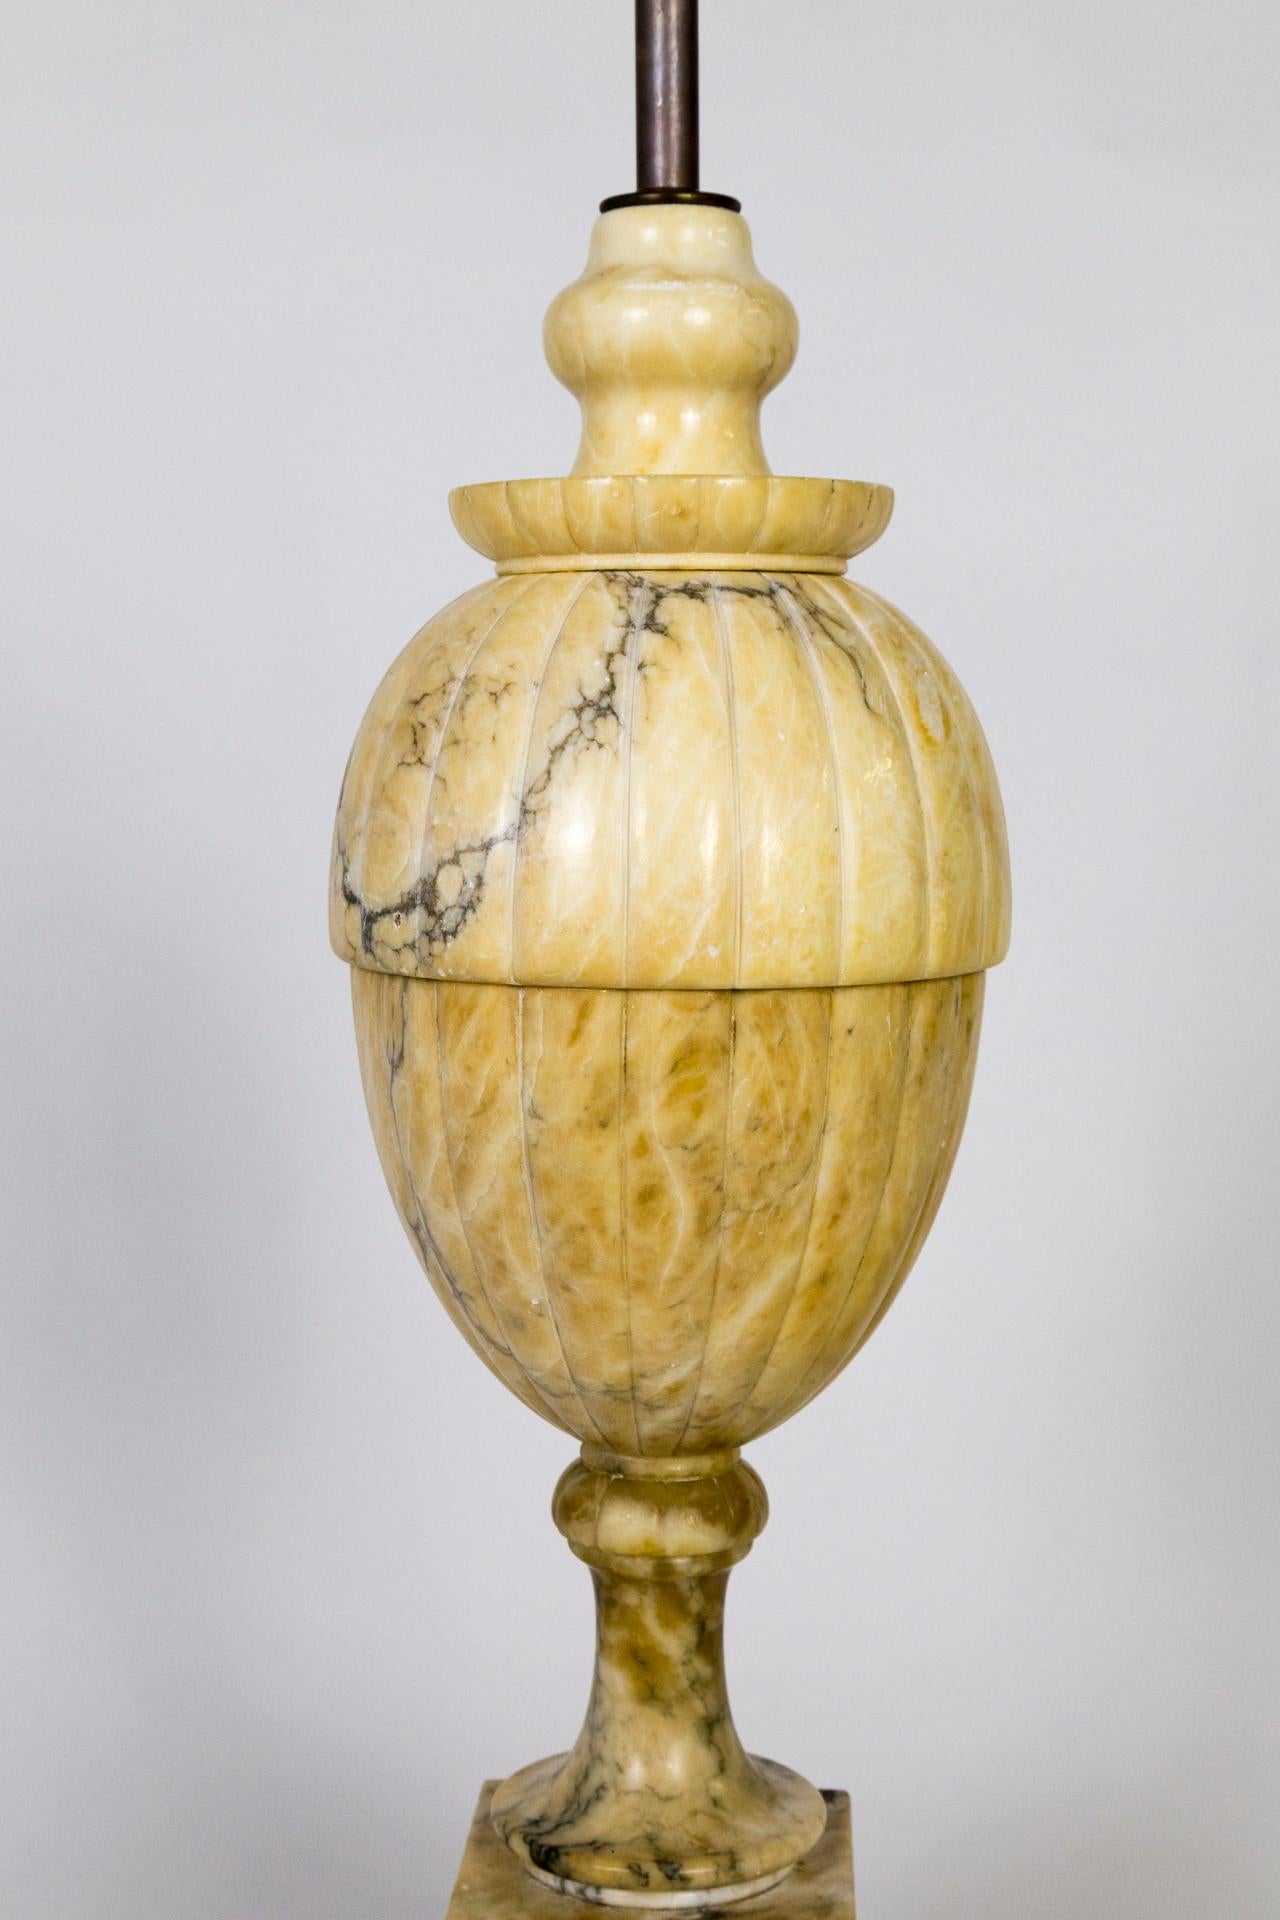 A sizable urn lamp in a marble complex in grain and amber color. Mounted on original, gilded base. Newly rewired with a brass neck and socket tinted bronze, American, 1930s. Measure: 8